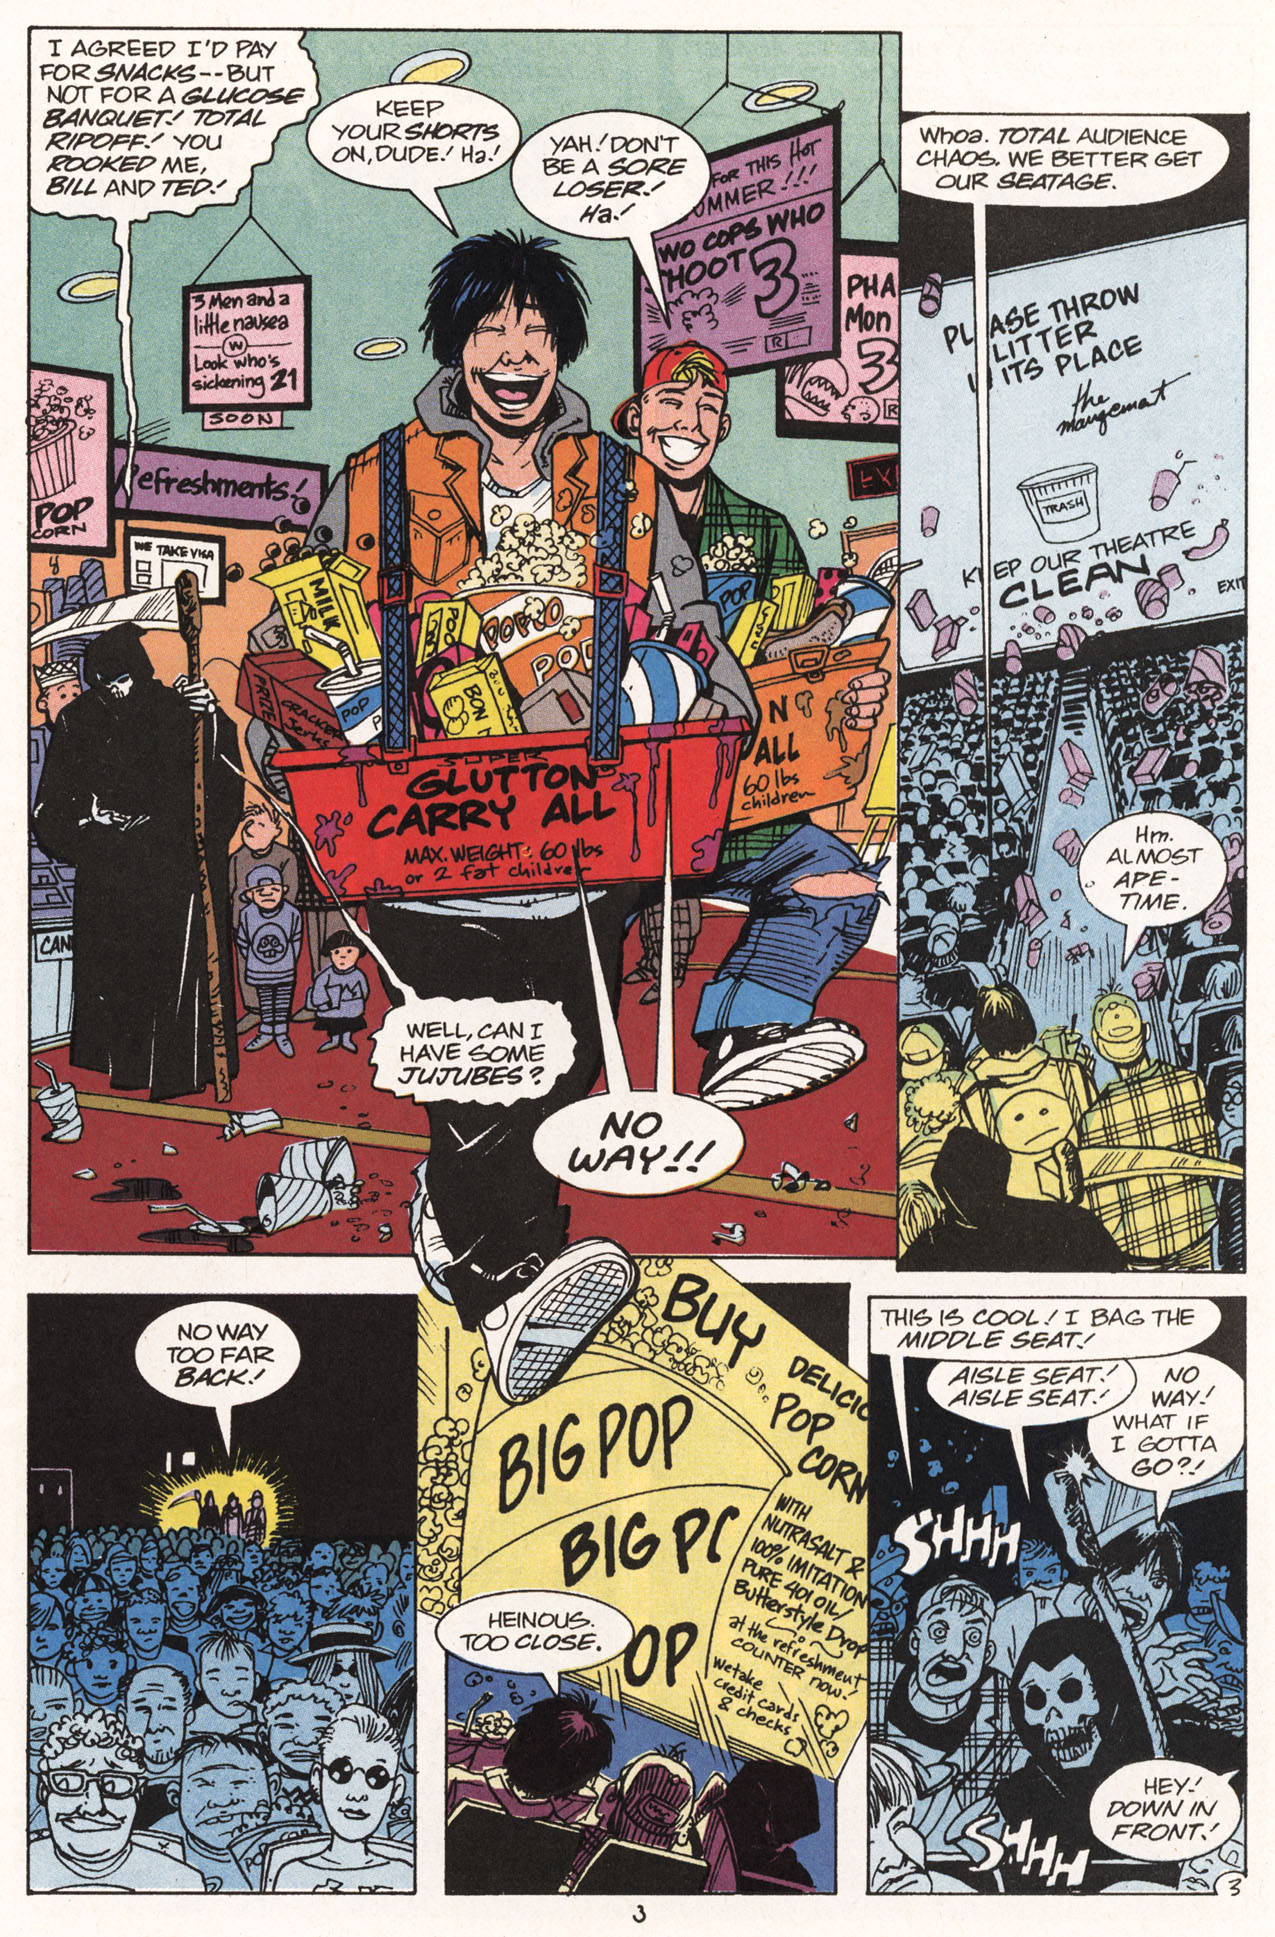 Read online Bill & Ted's Excellent Comic Book comic -  Issue #11 - 5